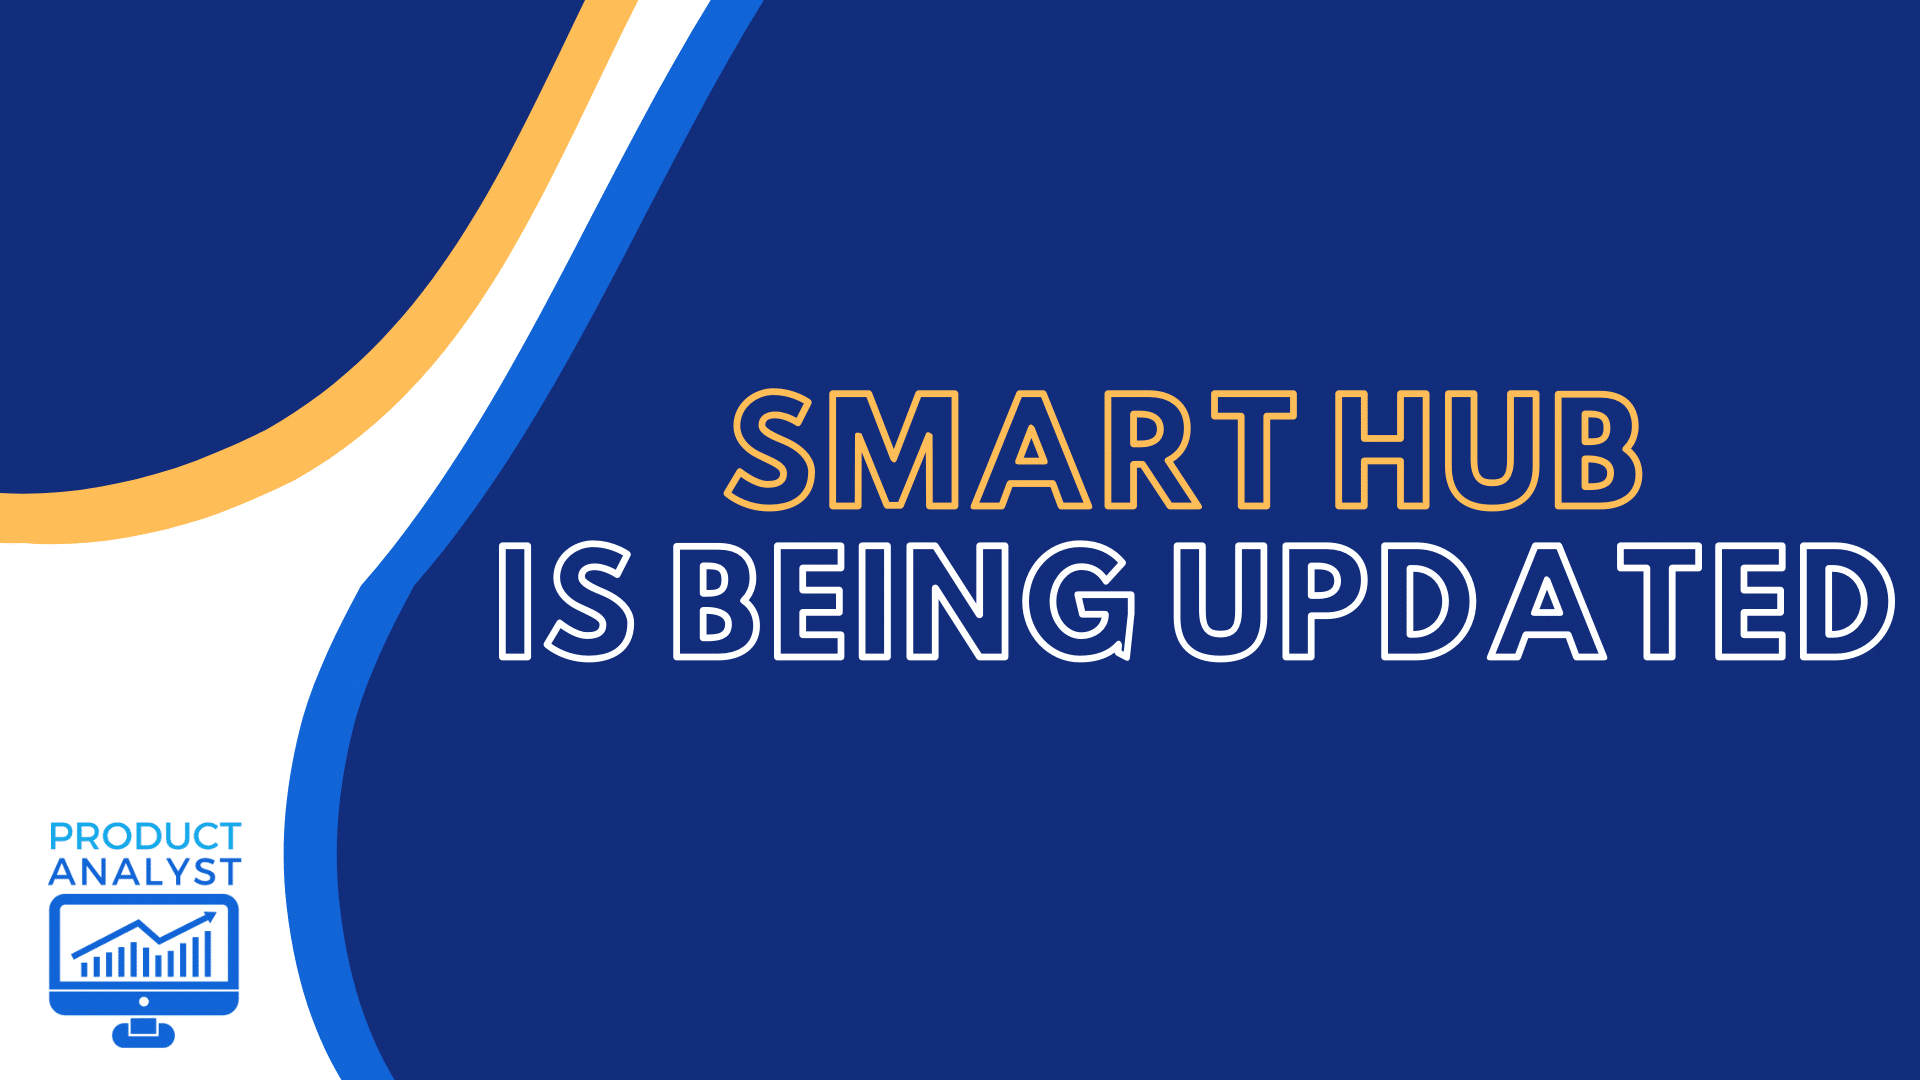 How To Fix The "Smart Hub Is Being Updated" Error Message [2022]